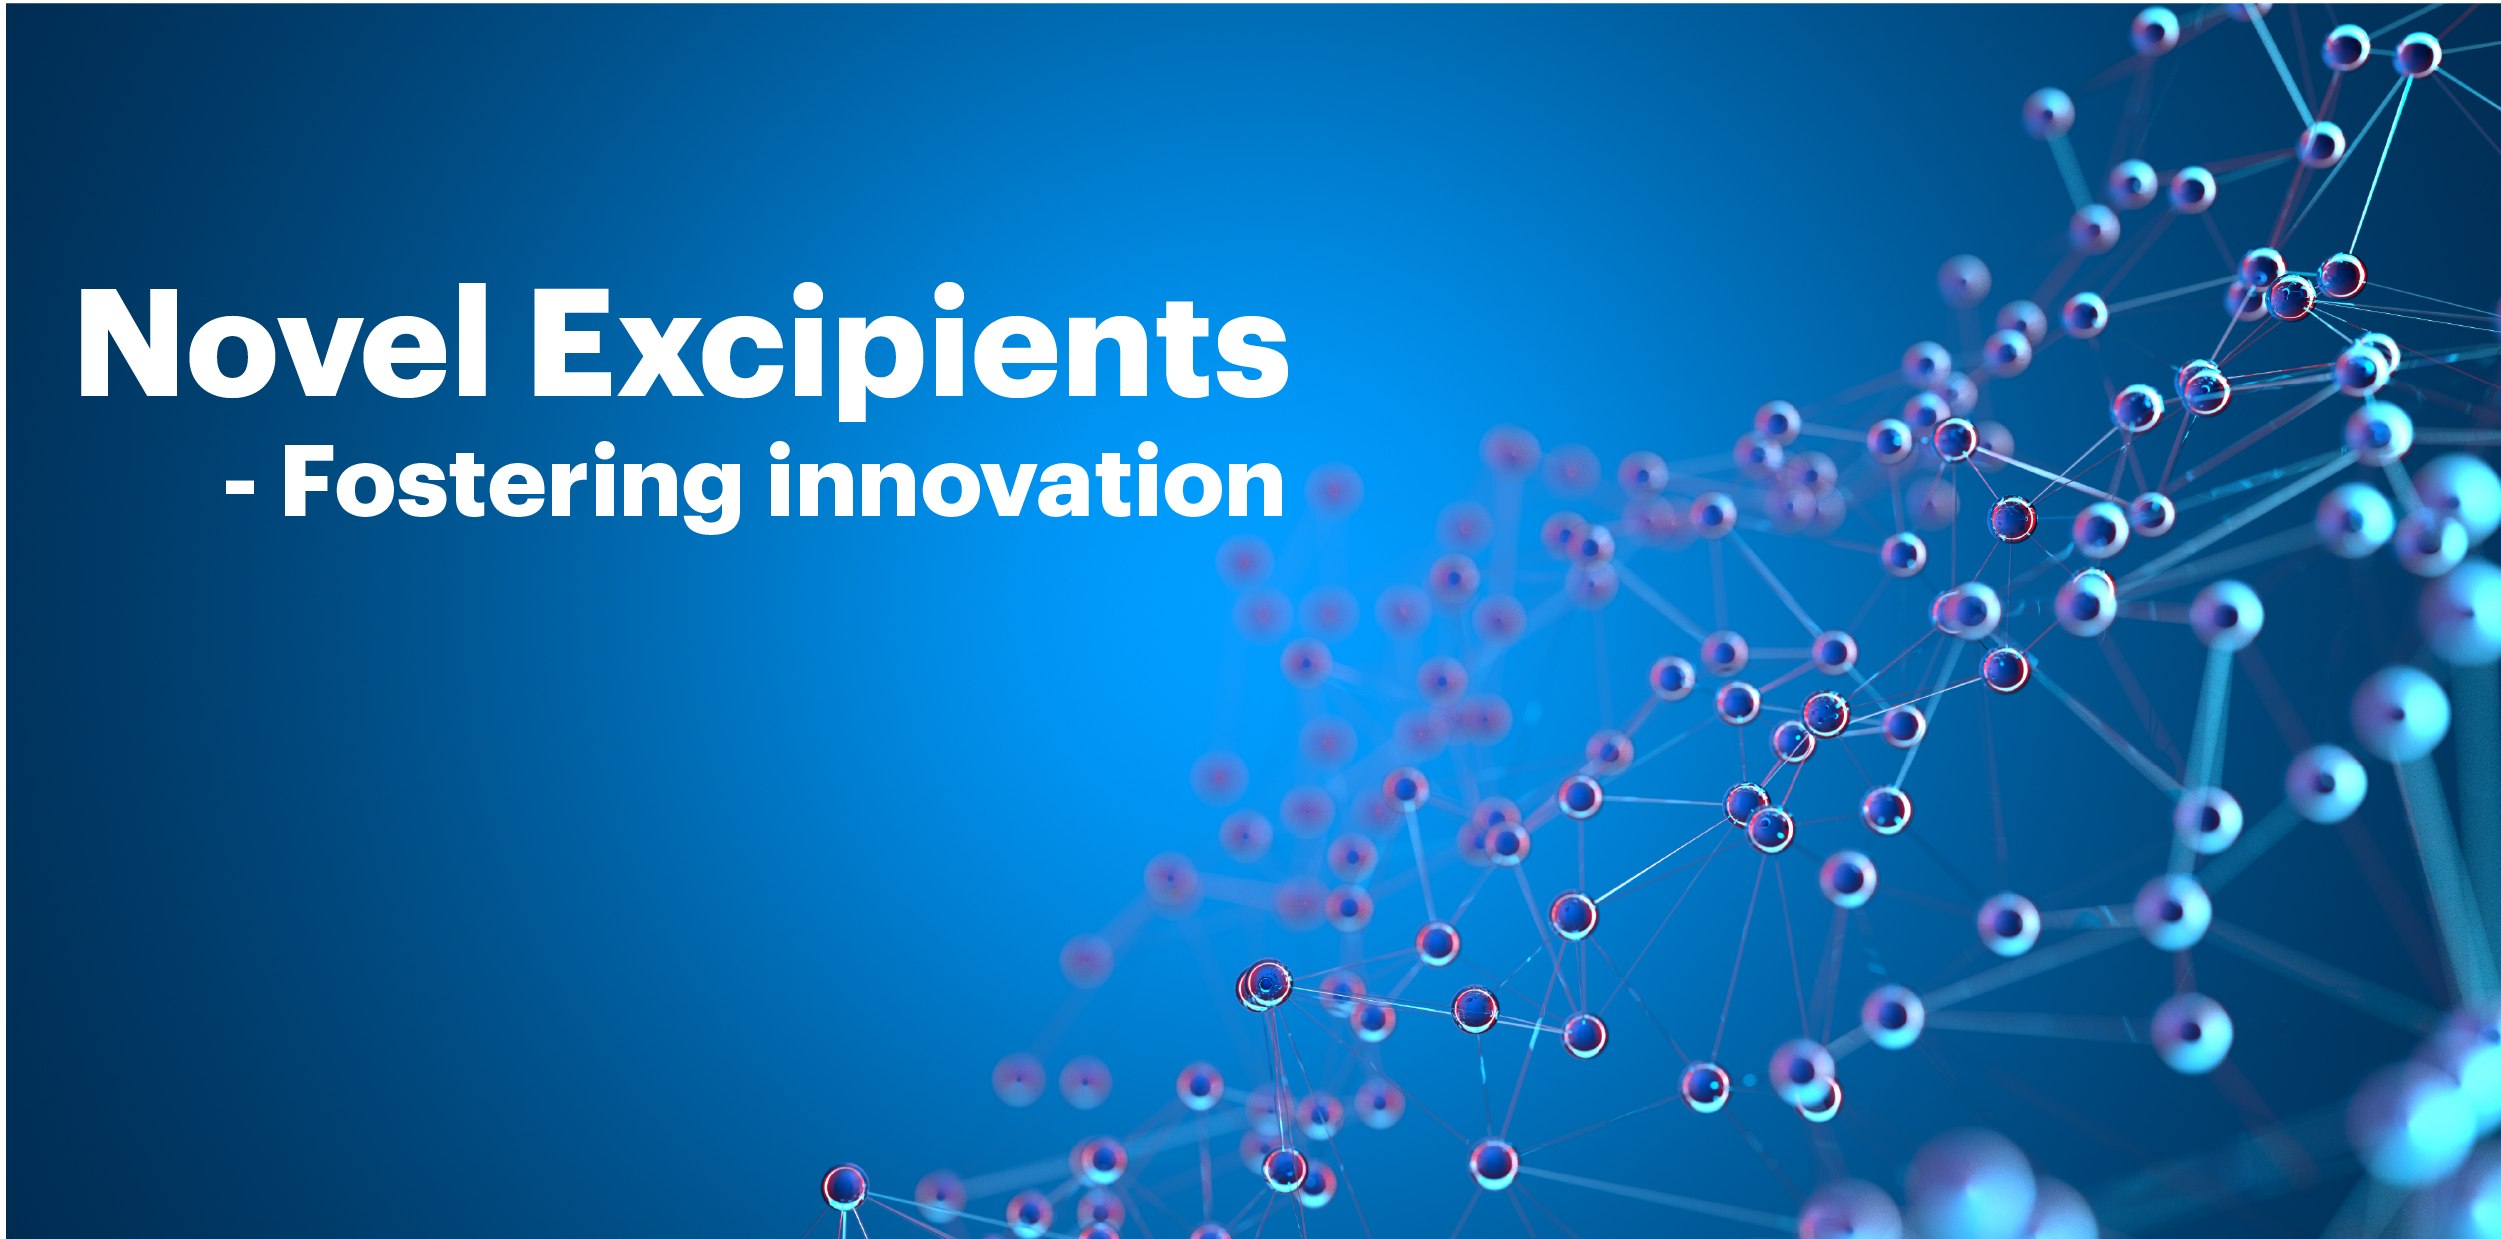 Novel Excipients - Fostering Innovation